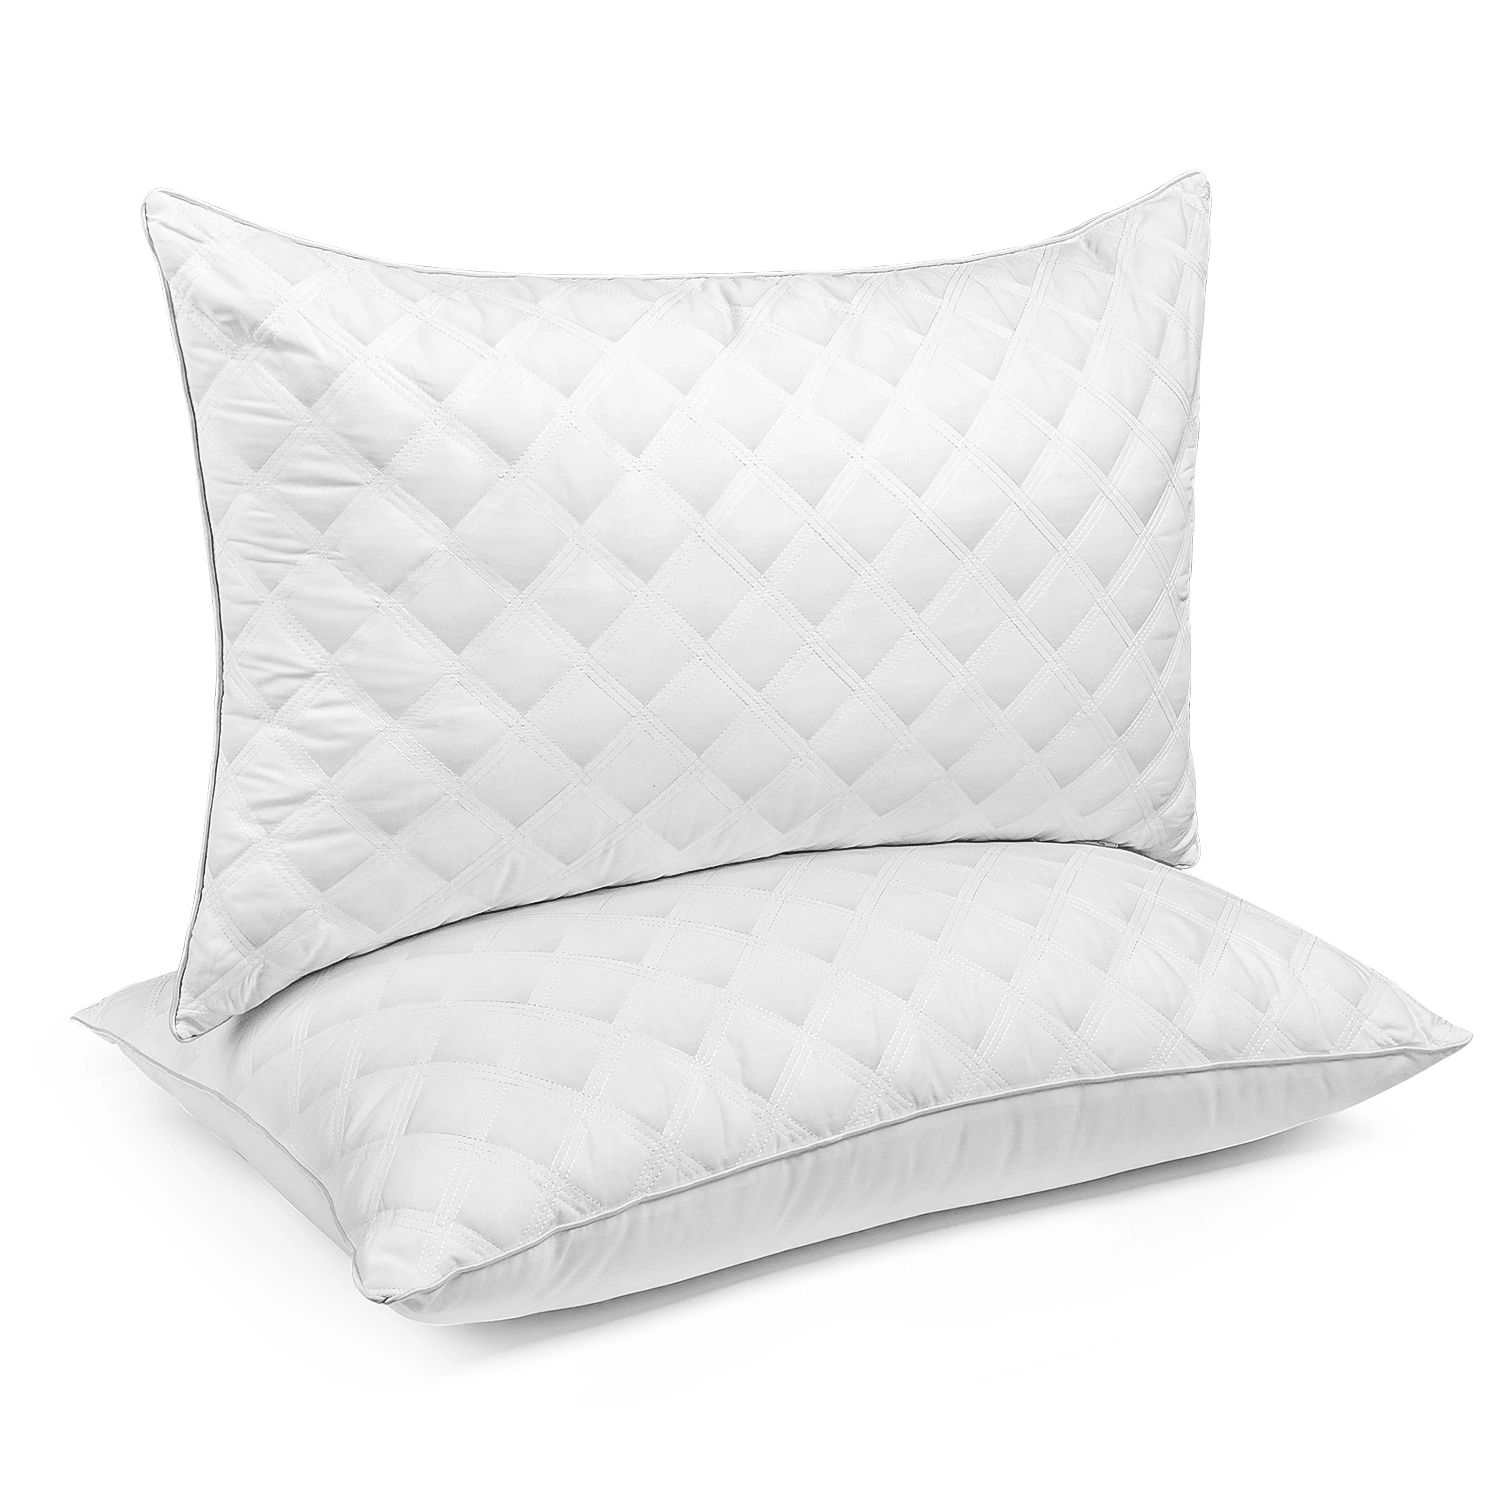 Bed Pillows for Side Sleeper Queen Size Pillows for Bed Set of 2 Cooling Hotel Gusseted Pillows f... | Walmart (US)